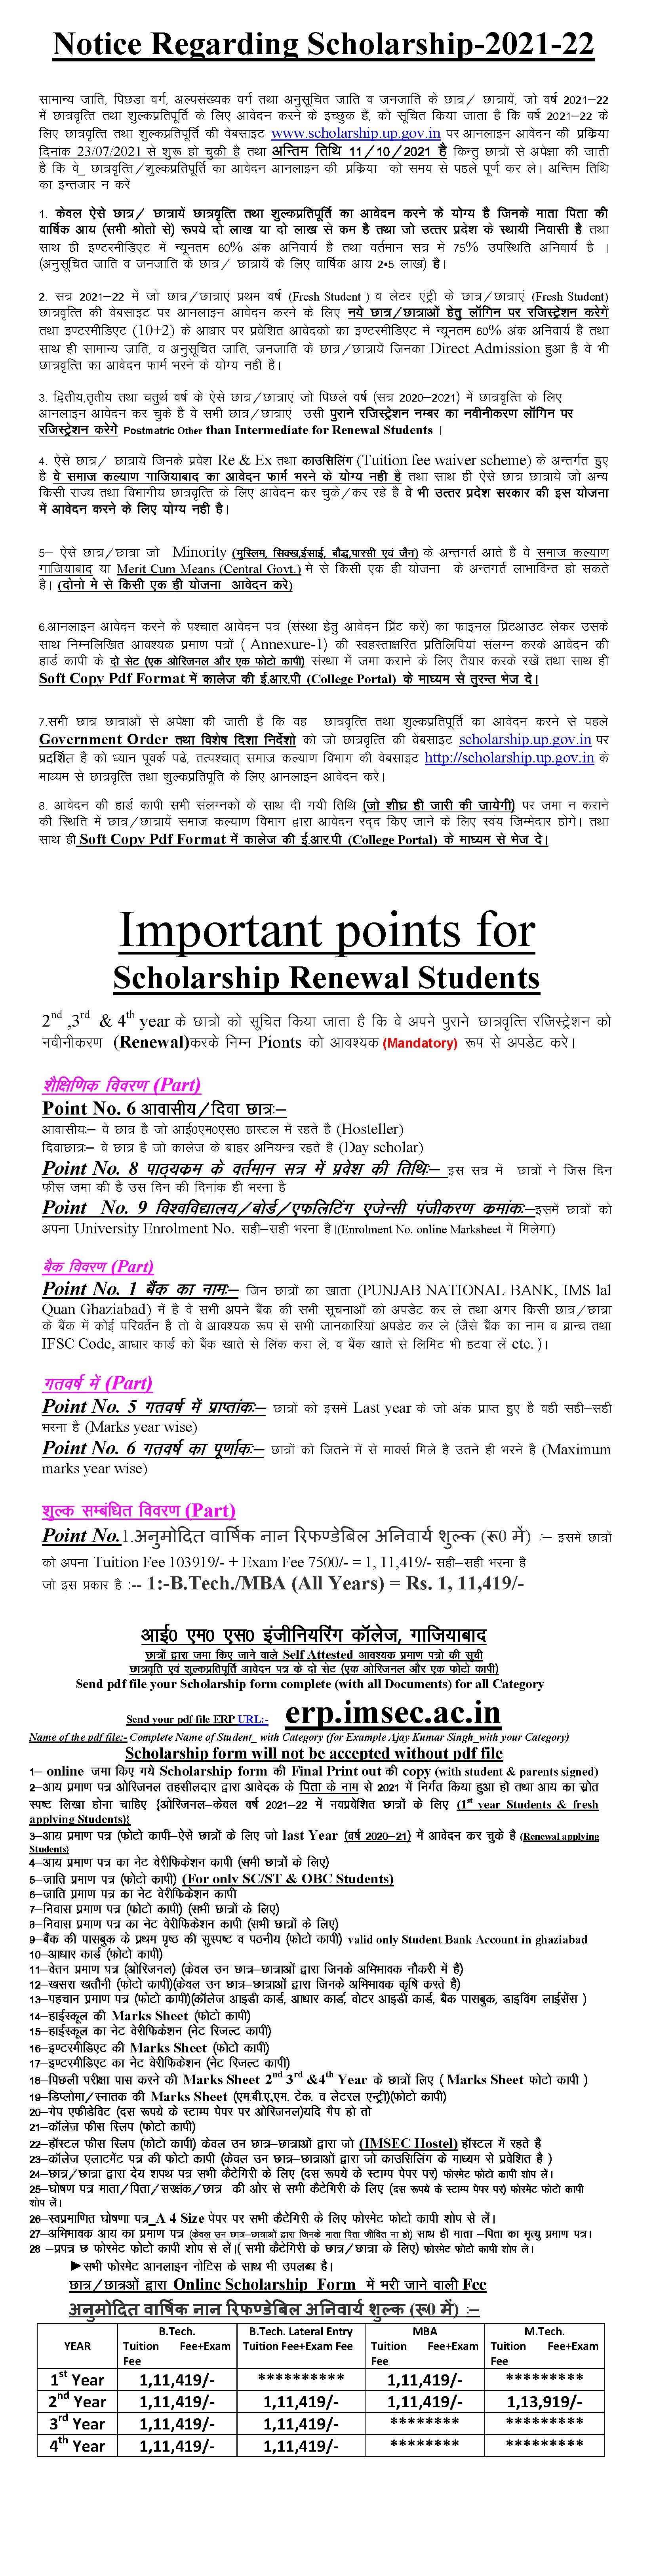 Notice for Scholarship Fresh & Renewal forms Session 2021-22 (Last date 11-10-2021)